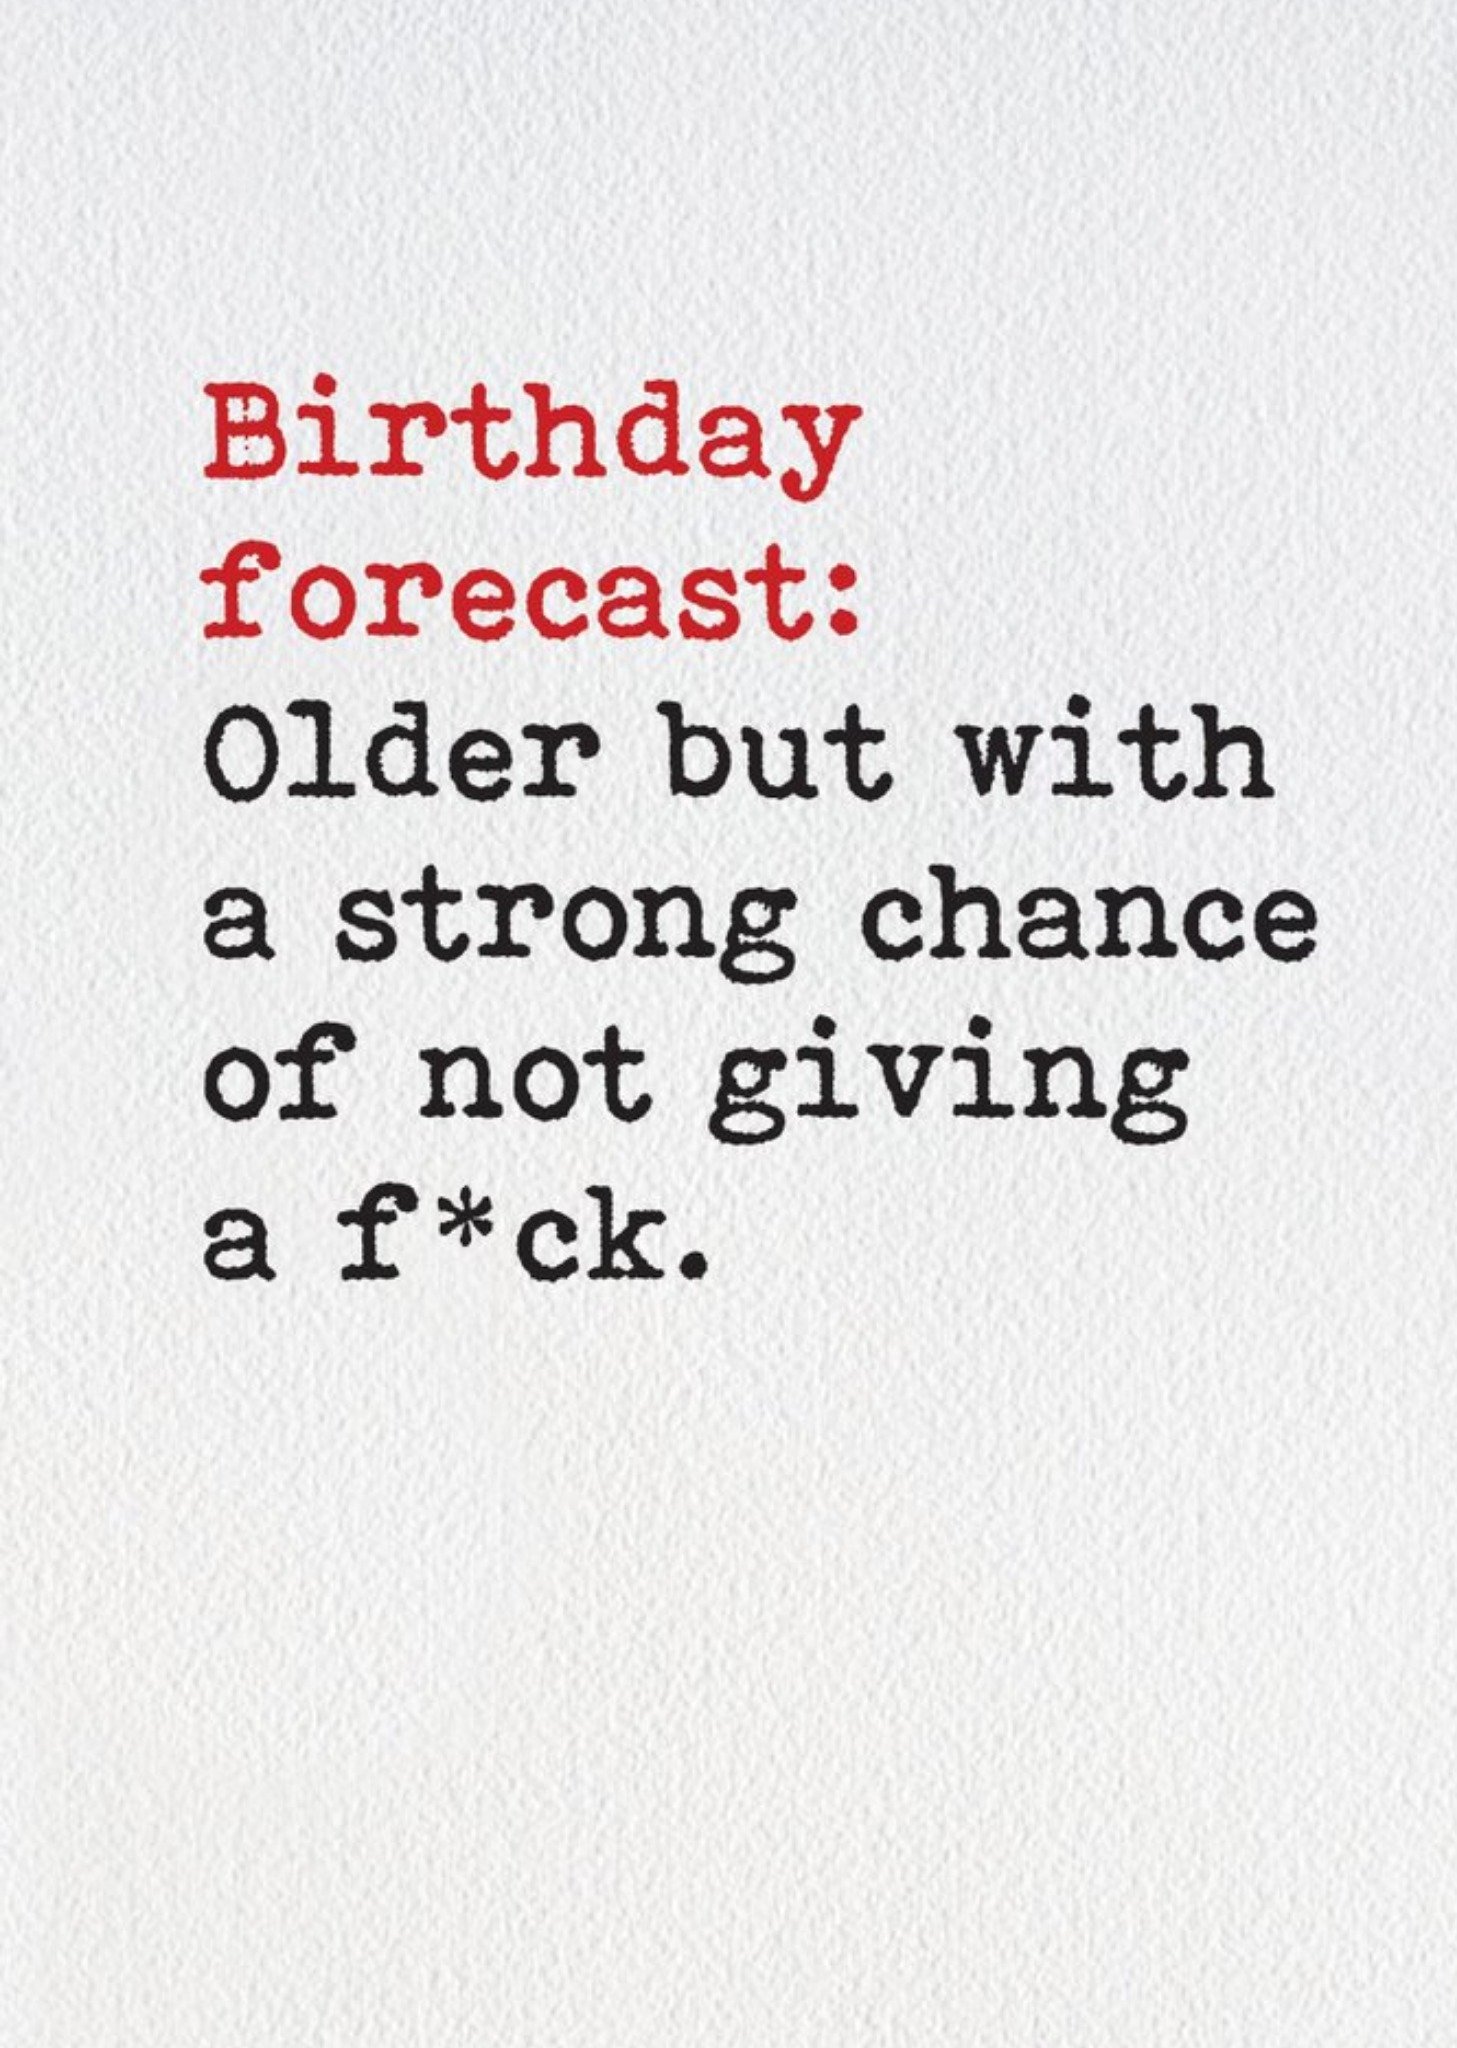 Brainbox Candy Rude Funny Birthday Forecast Older But Strong Chance Of Not Giving A Fuck Card, Large